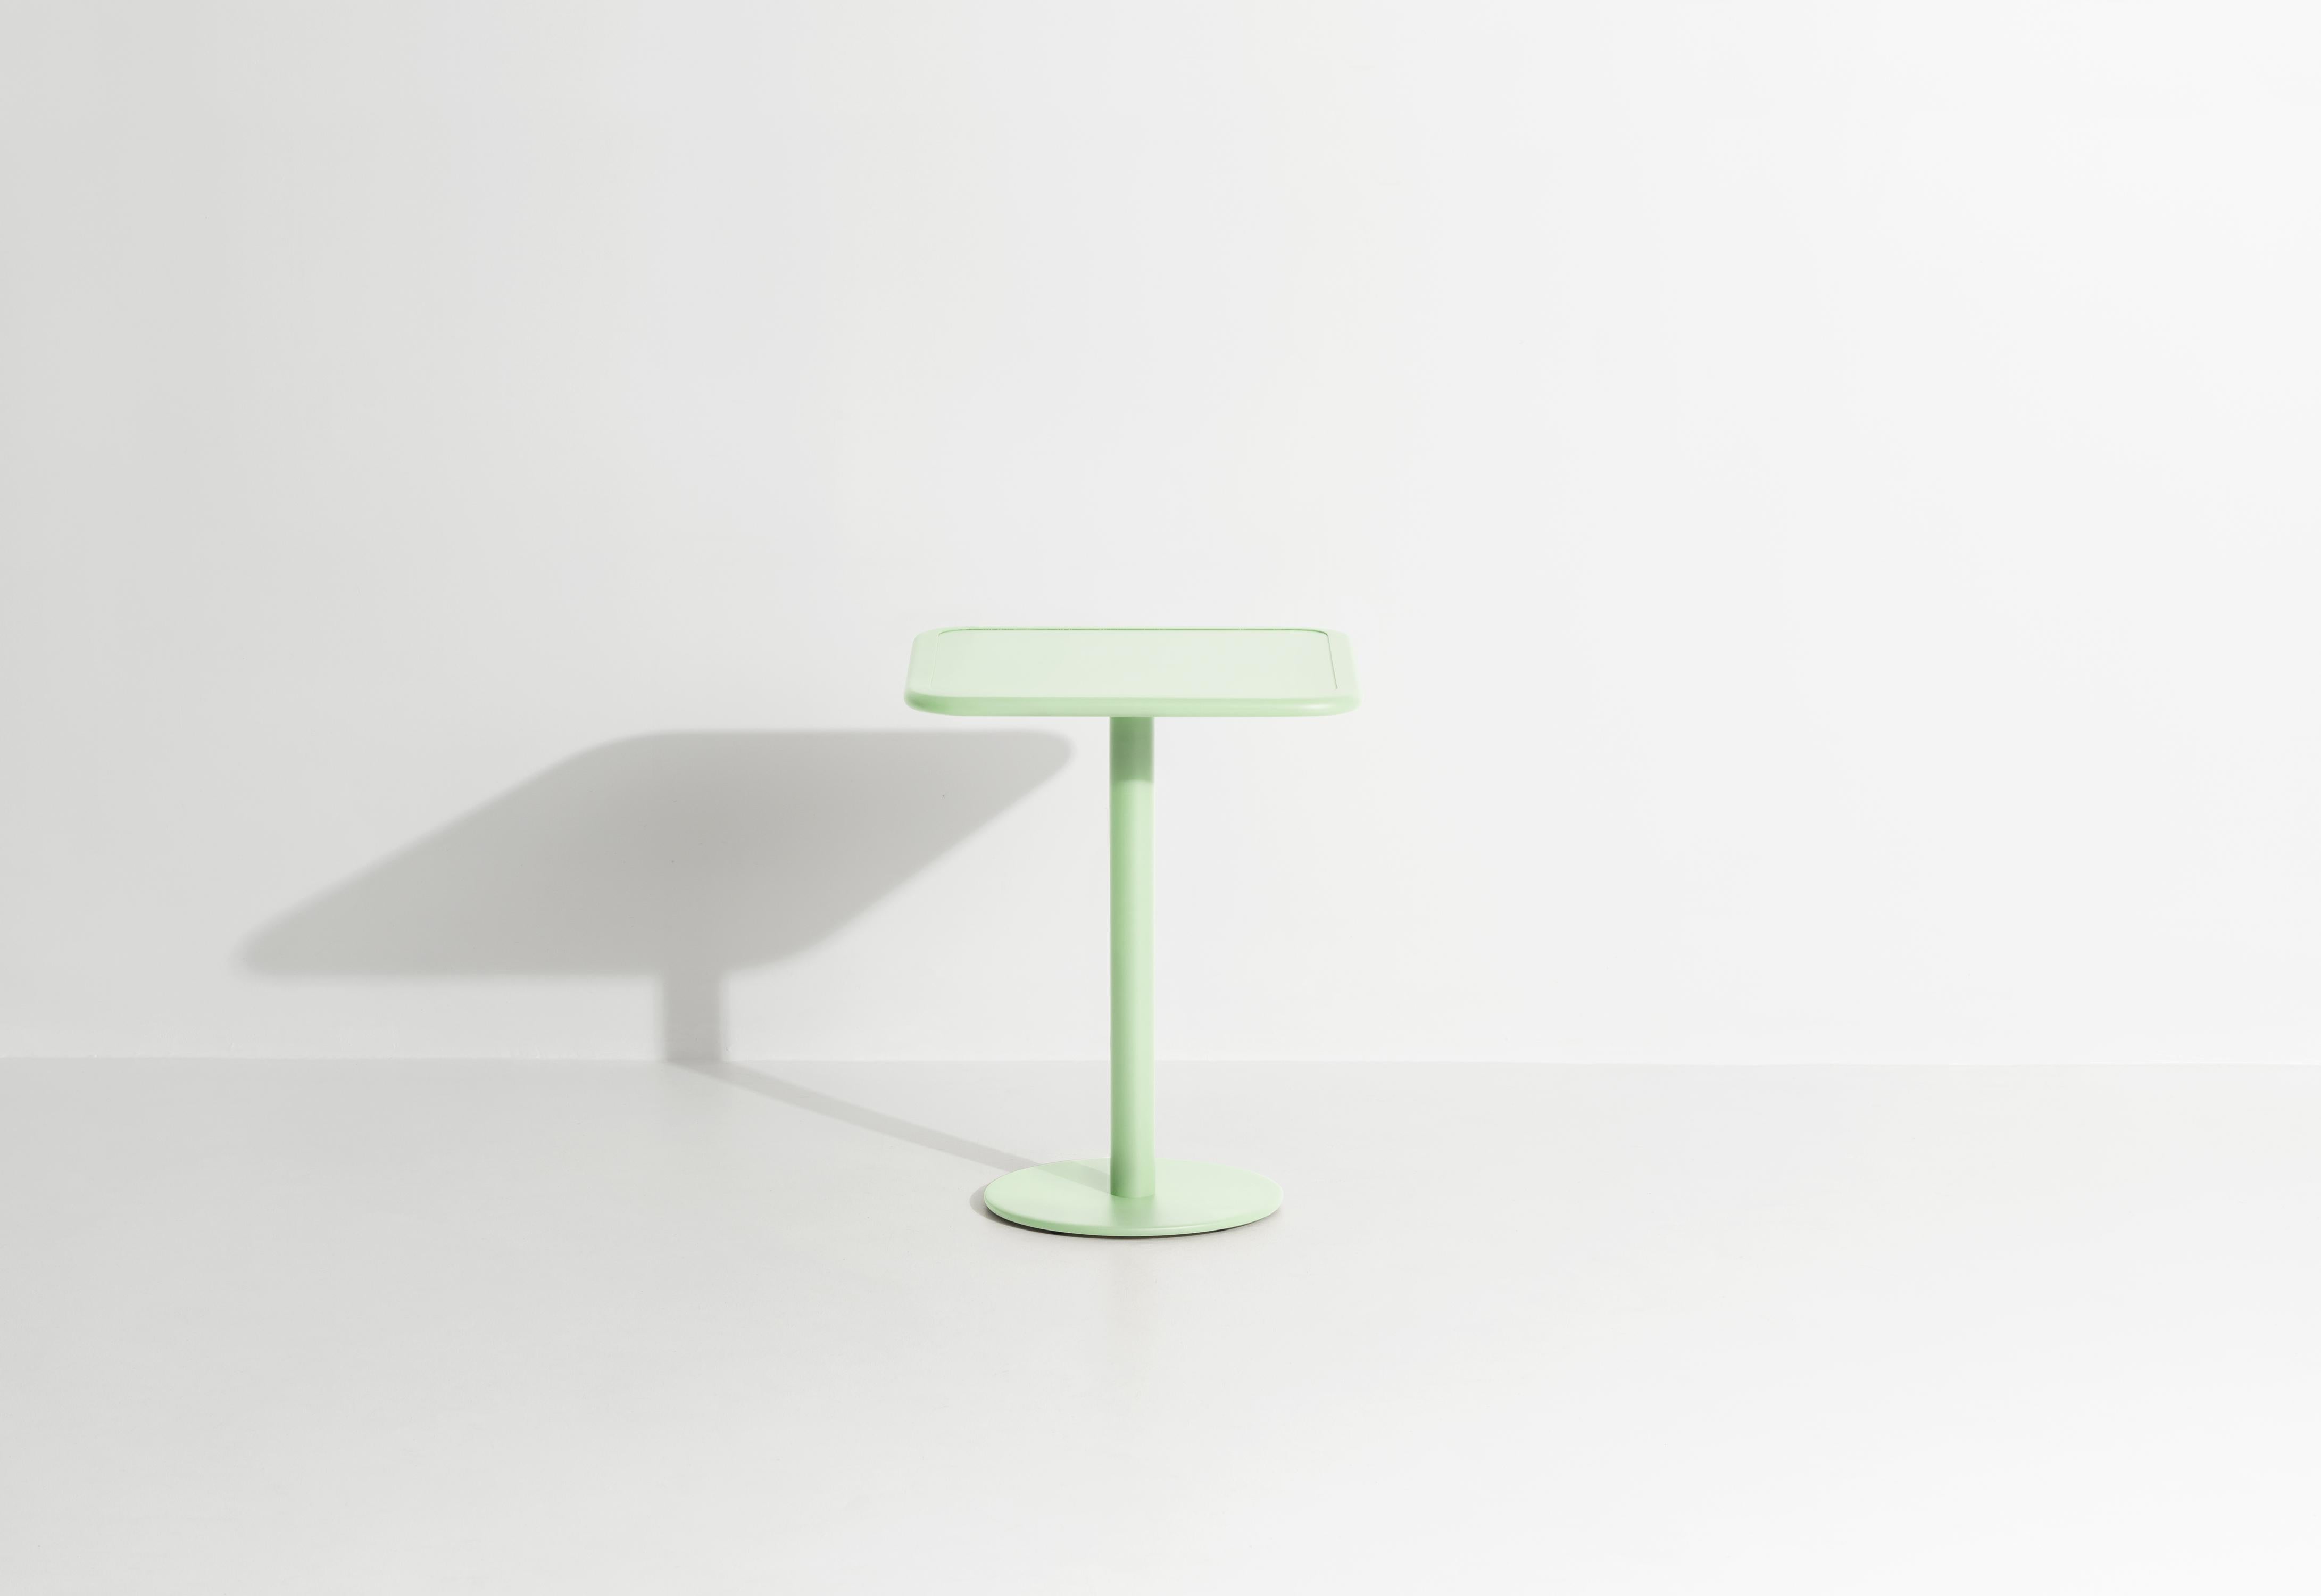 Petite Friture Week-End Bistro Square Dining Table in Pastel Green Aluminium by Studio BrichetZiegler, 2017

The week-end collection is a full range of outdoor furniture, in aluminium grained epoxy paint, matt finish, that includes 18 functions